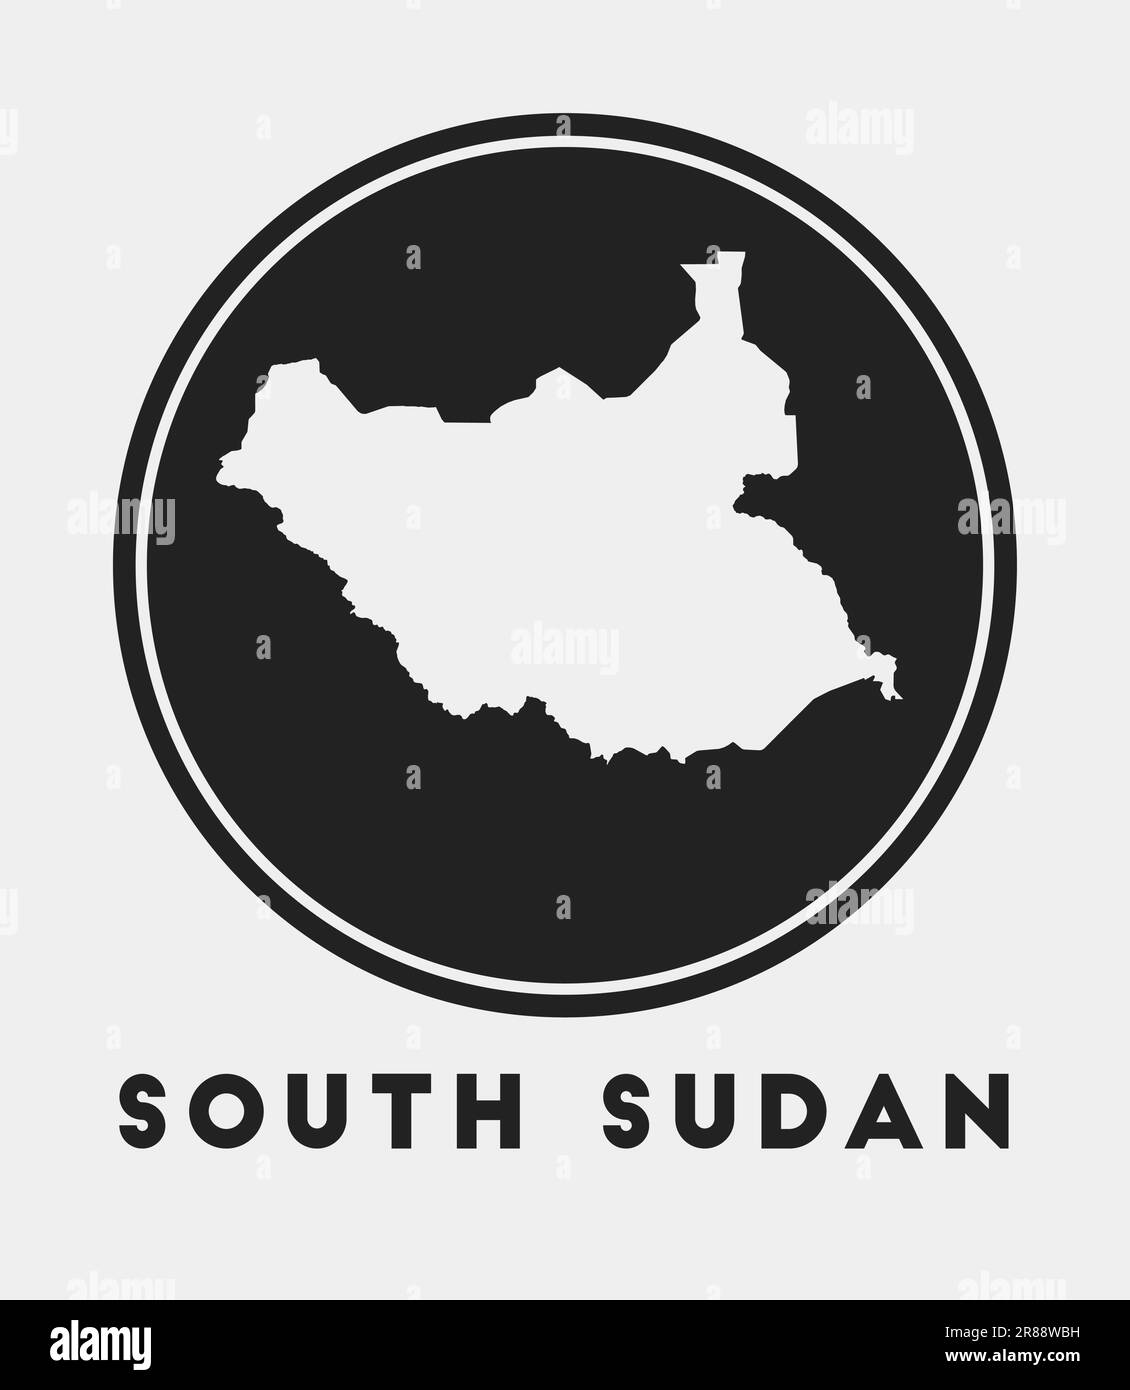 South Sudan icon. Round logo with country map and title. Stylish South Sudan badge with map. Vector illustration. Stock Vector